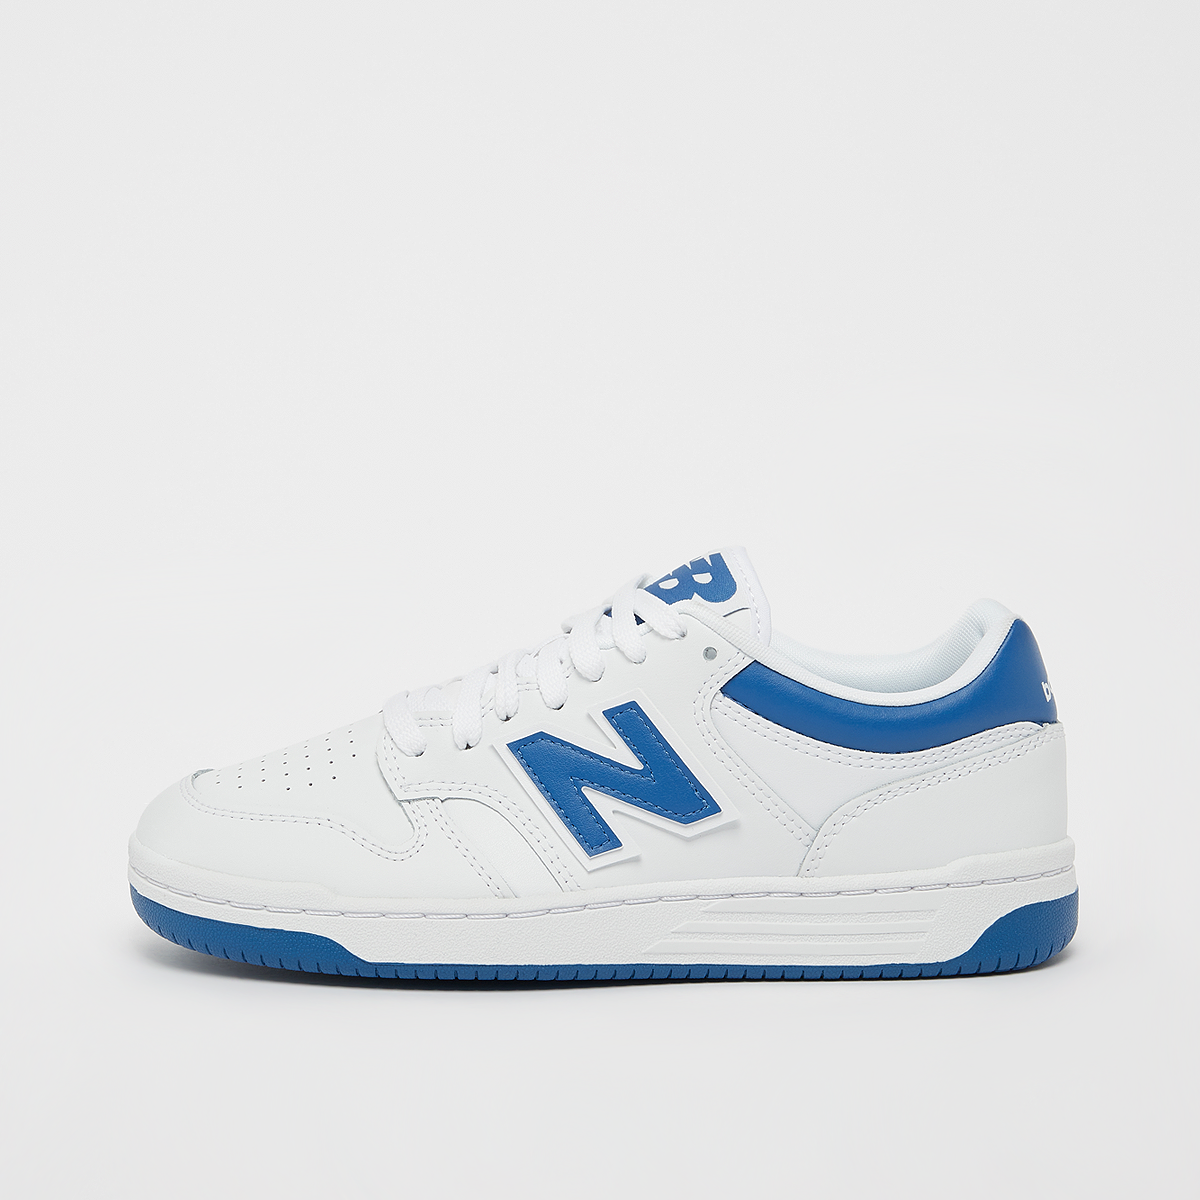 480L, New Balance, Footwear, white/blue, taille: 37